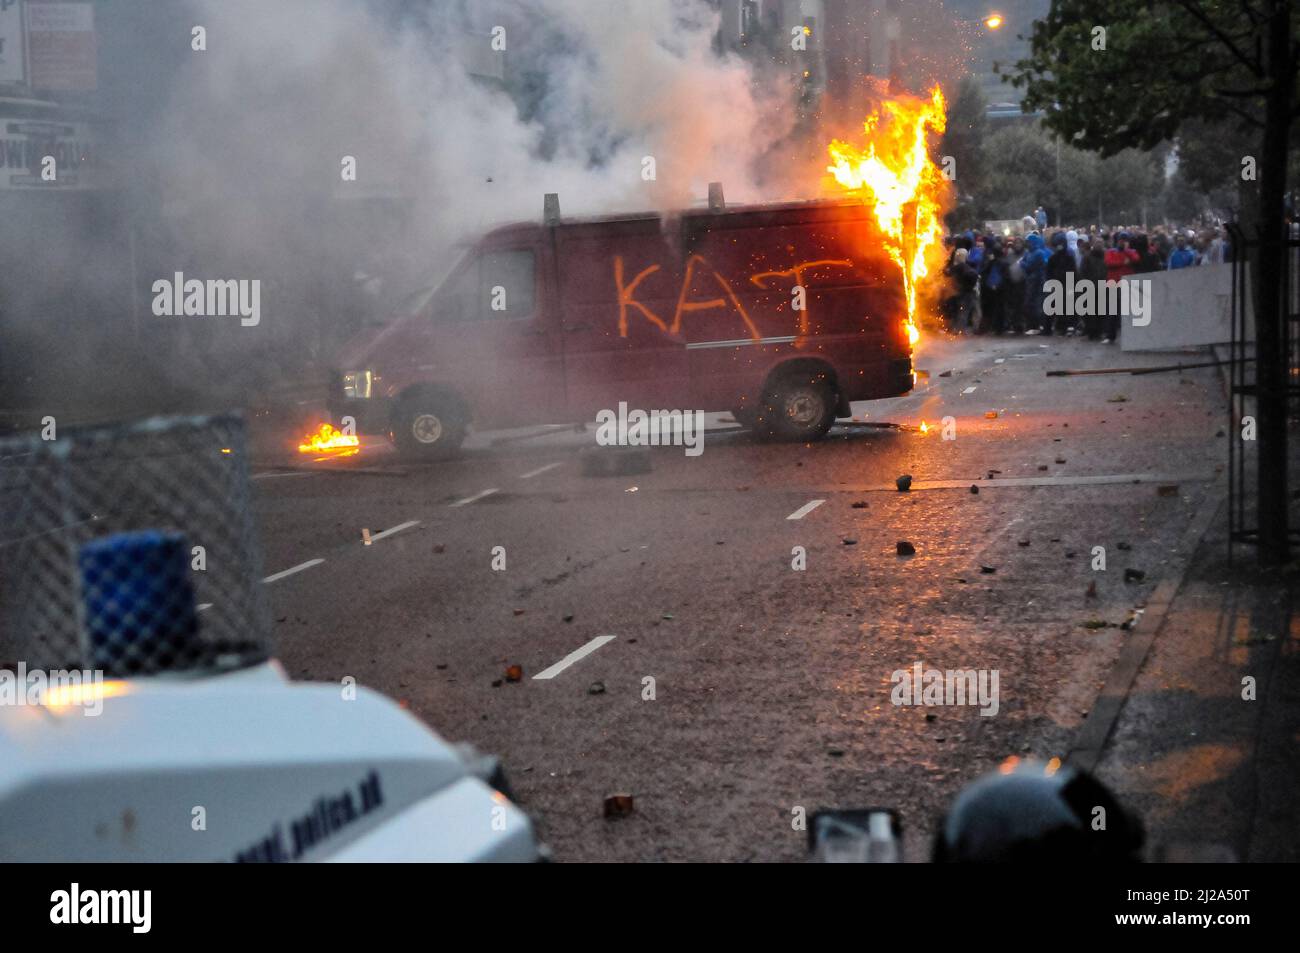 Belfast, Northern Ireland. 9th August 2013 - An anti-Internment parade by republicans sparks riots by protesting loyalists in Belfast.  A van has KAT (Kill all Taigs) written in spray paint on the side. Stock Photo